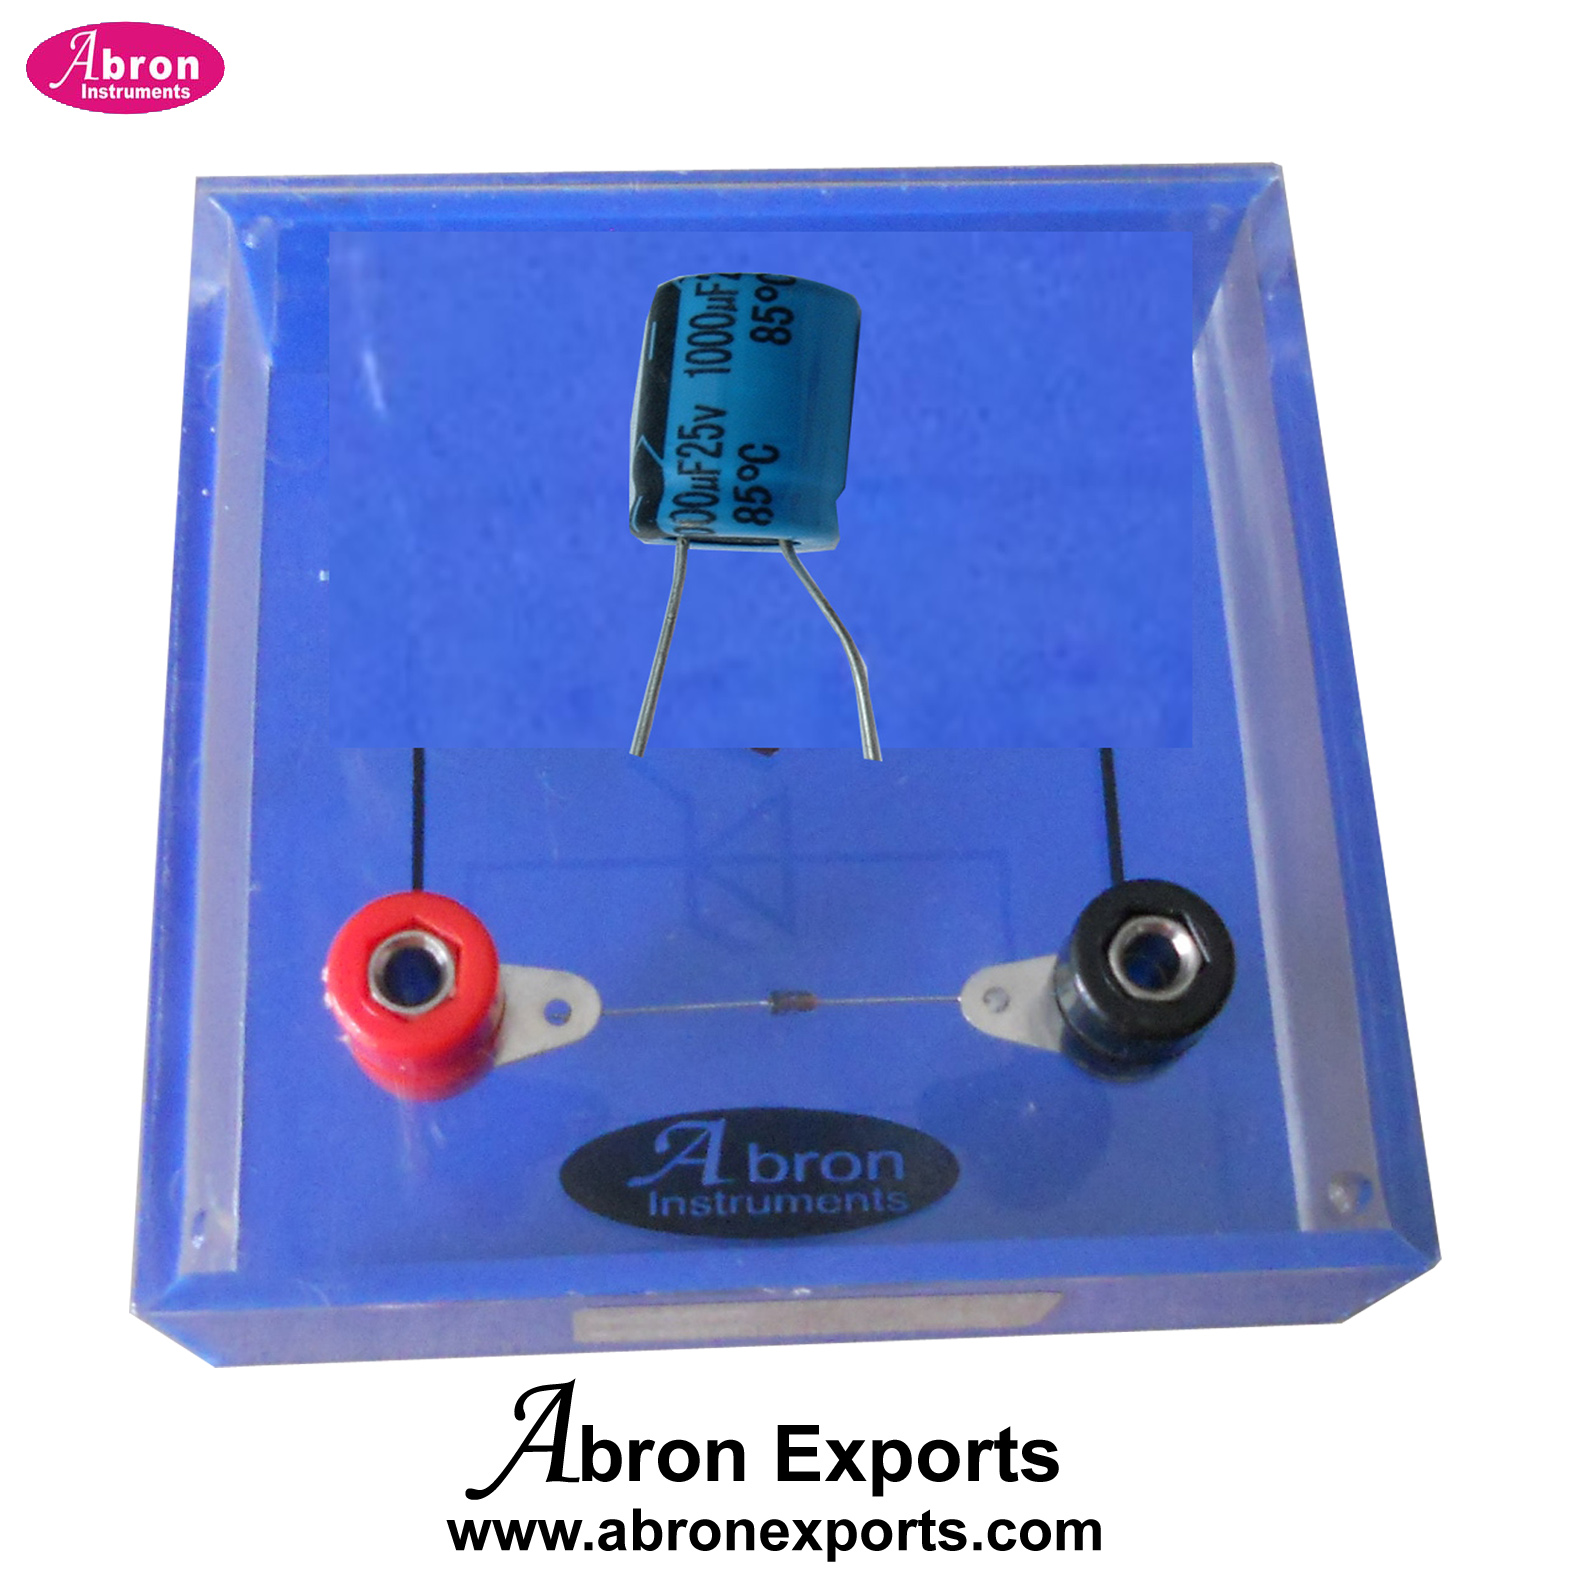 Condenser Electrolytic With Sockets Terminal for Charging Dischargig Trainer Abron AE-1220S 